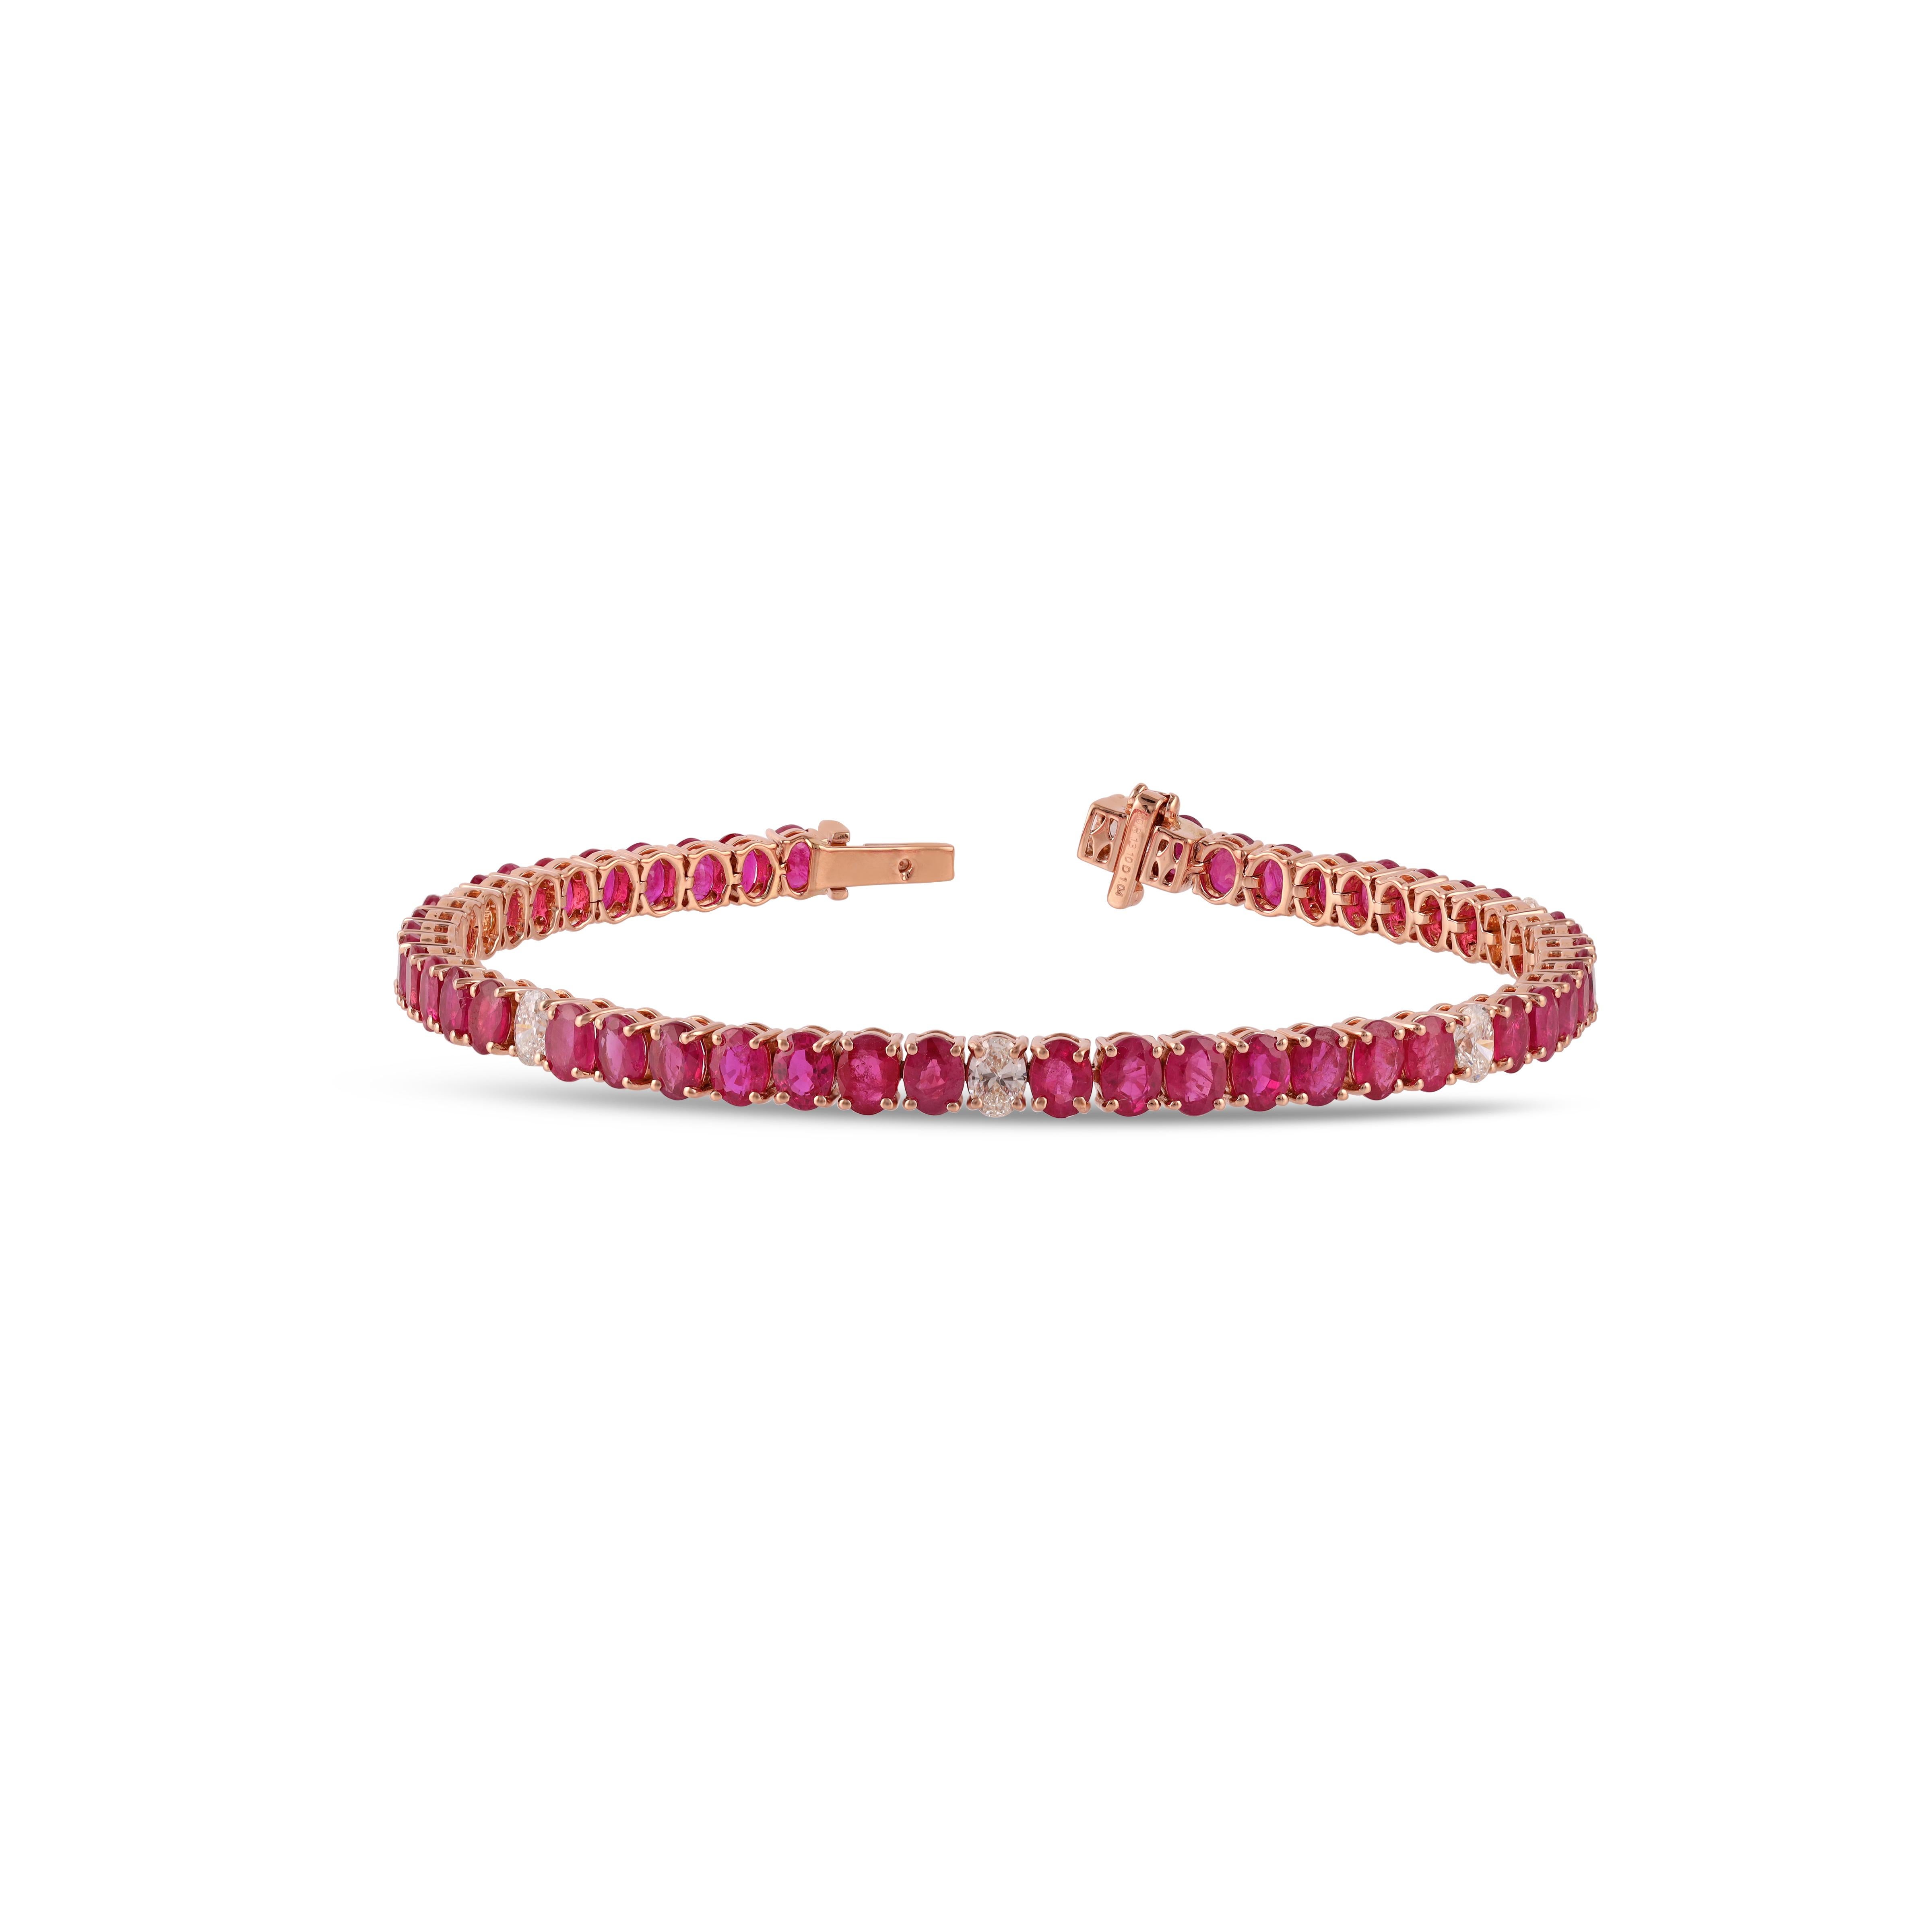 13.10 Carat Ruby and Diamond  Bracelet in 18K Rose Gold

This magnificent Oval shape sapphire tennis bracelet is incredulous. The solitaire Oval-shaped Oval-cut Ruby
 are beautifully With  Diamonds making the bracelet more graceful and adding